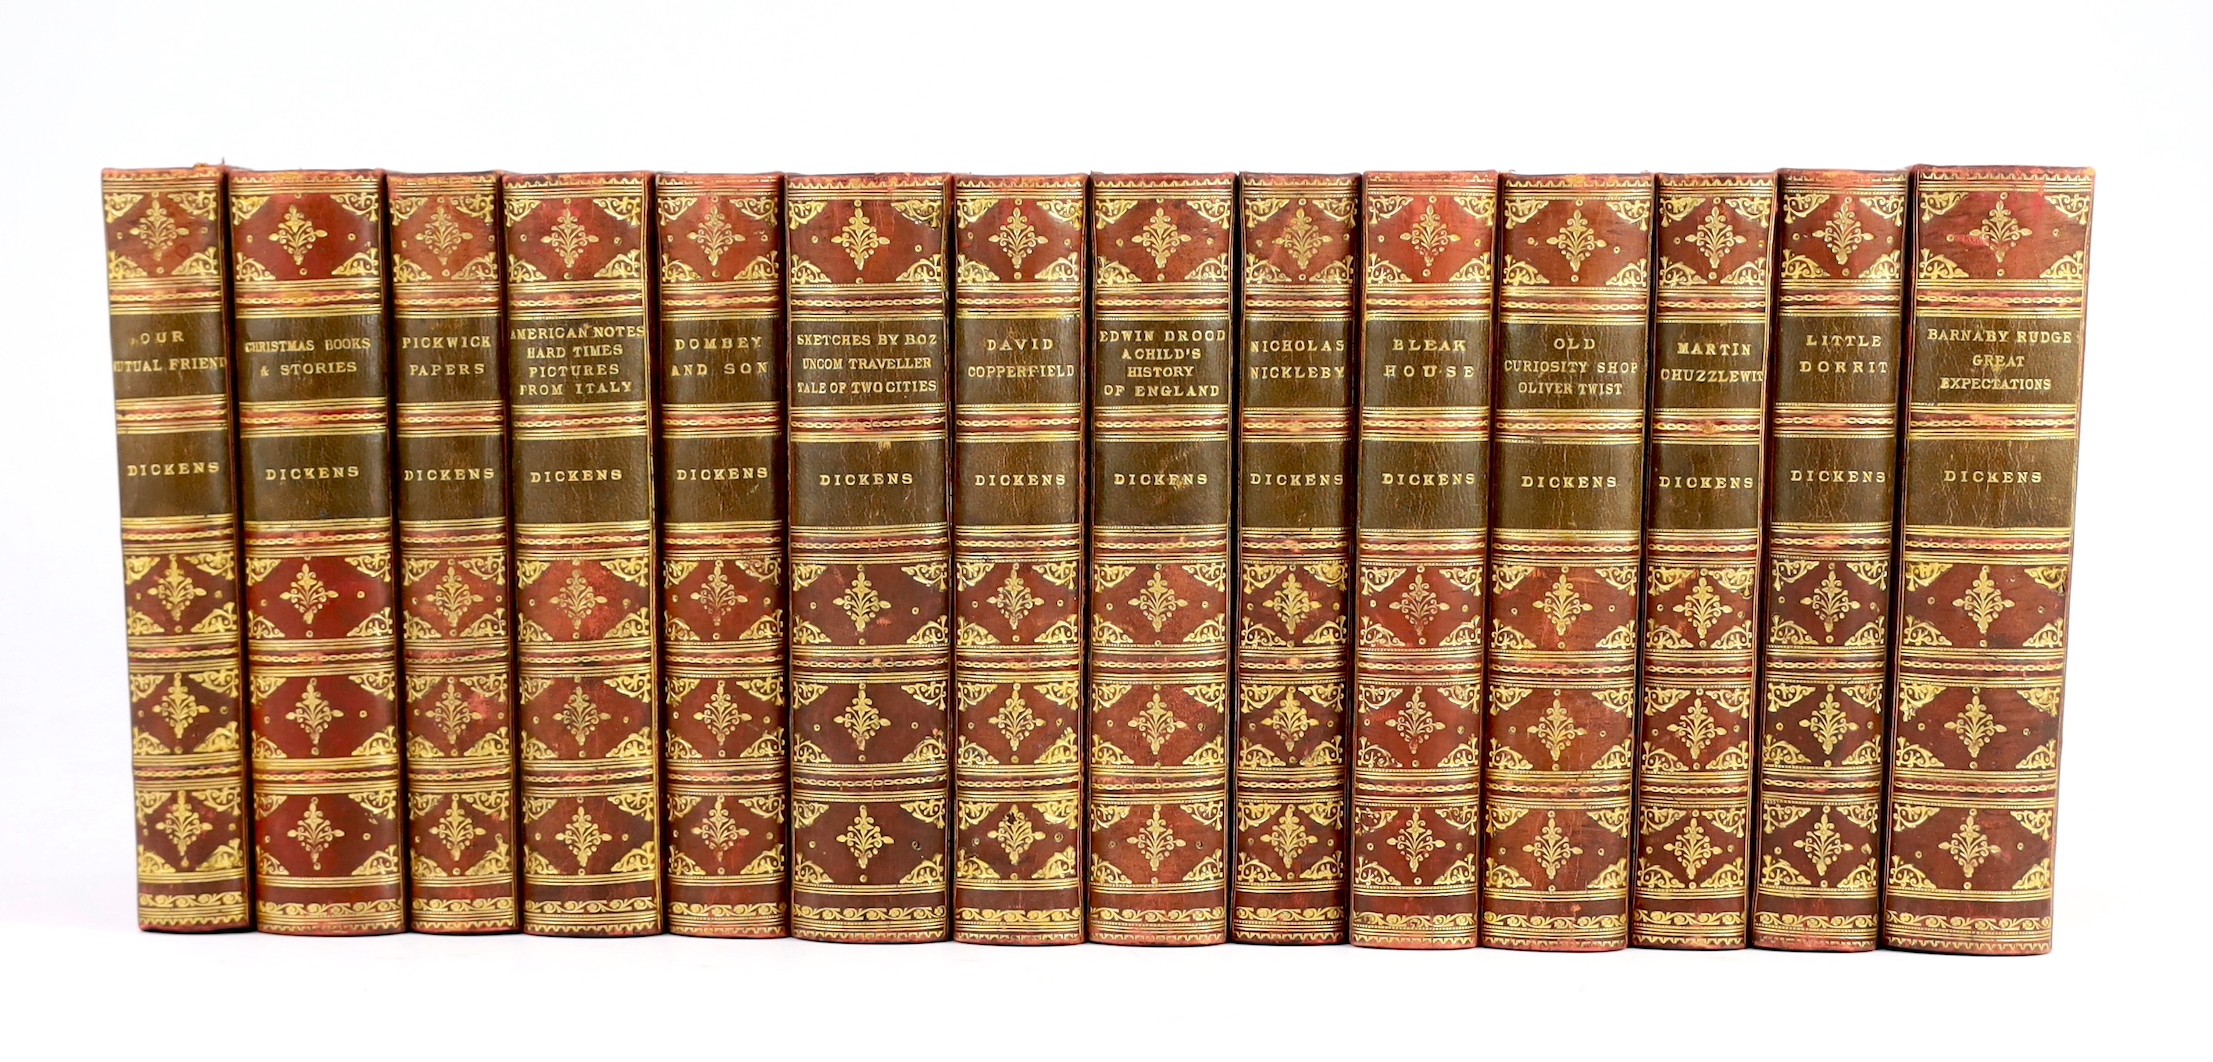 Dickens, Charles - Works - ‘’The Charles Dickens edition’’, 14 vols (of 21) 8vo, half red morocco, with marbled boards, Chapman and Hall, London, c. 1890